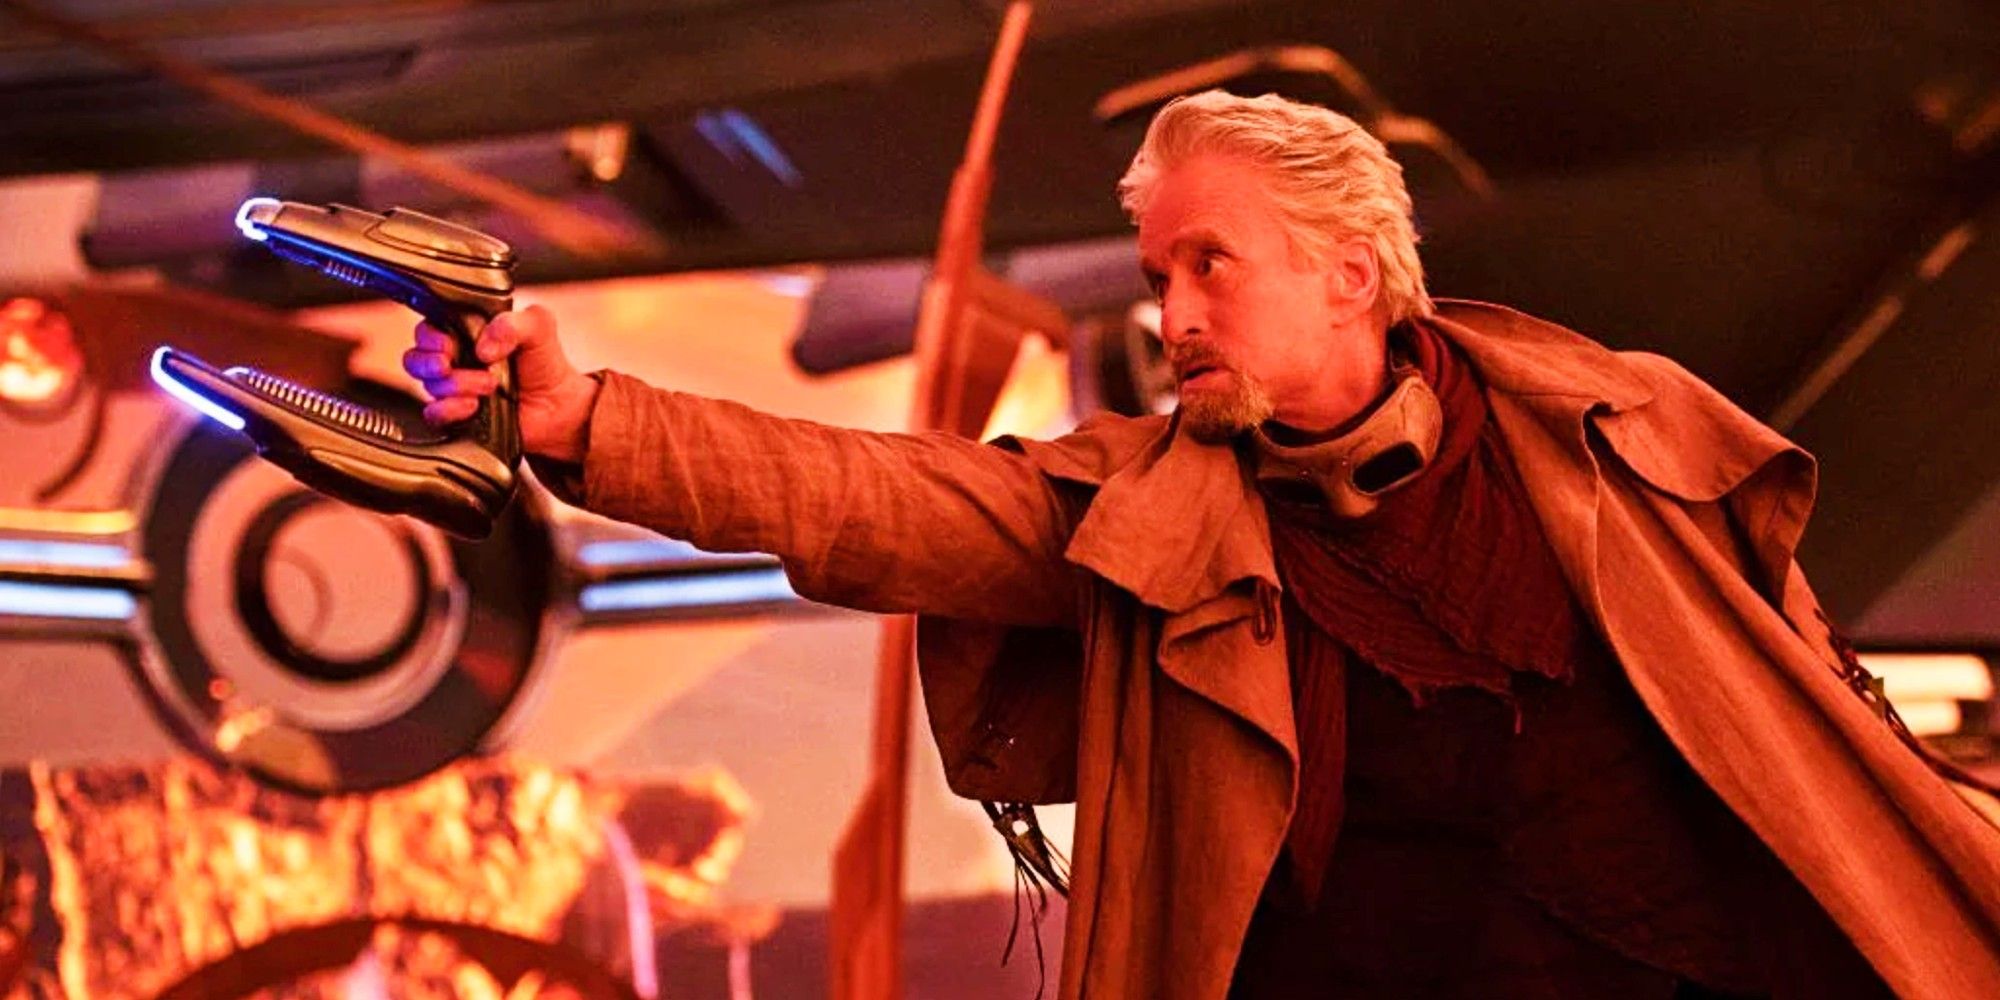 Michael Douglas as Hank Pym holding a blaster in Ant-Man and the Wasp Quantumania